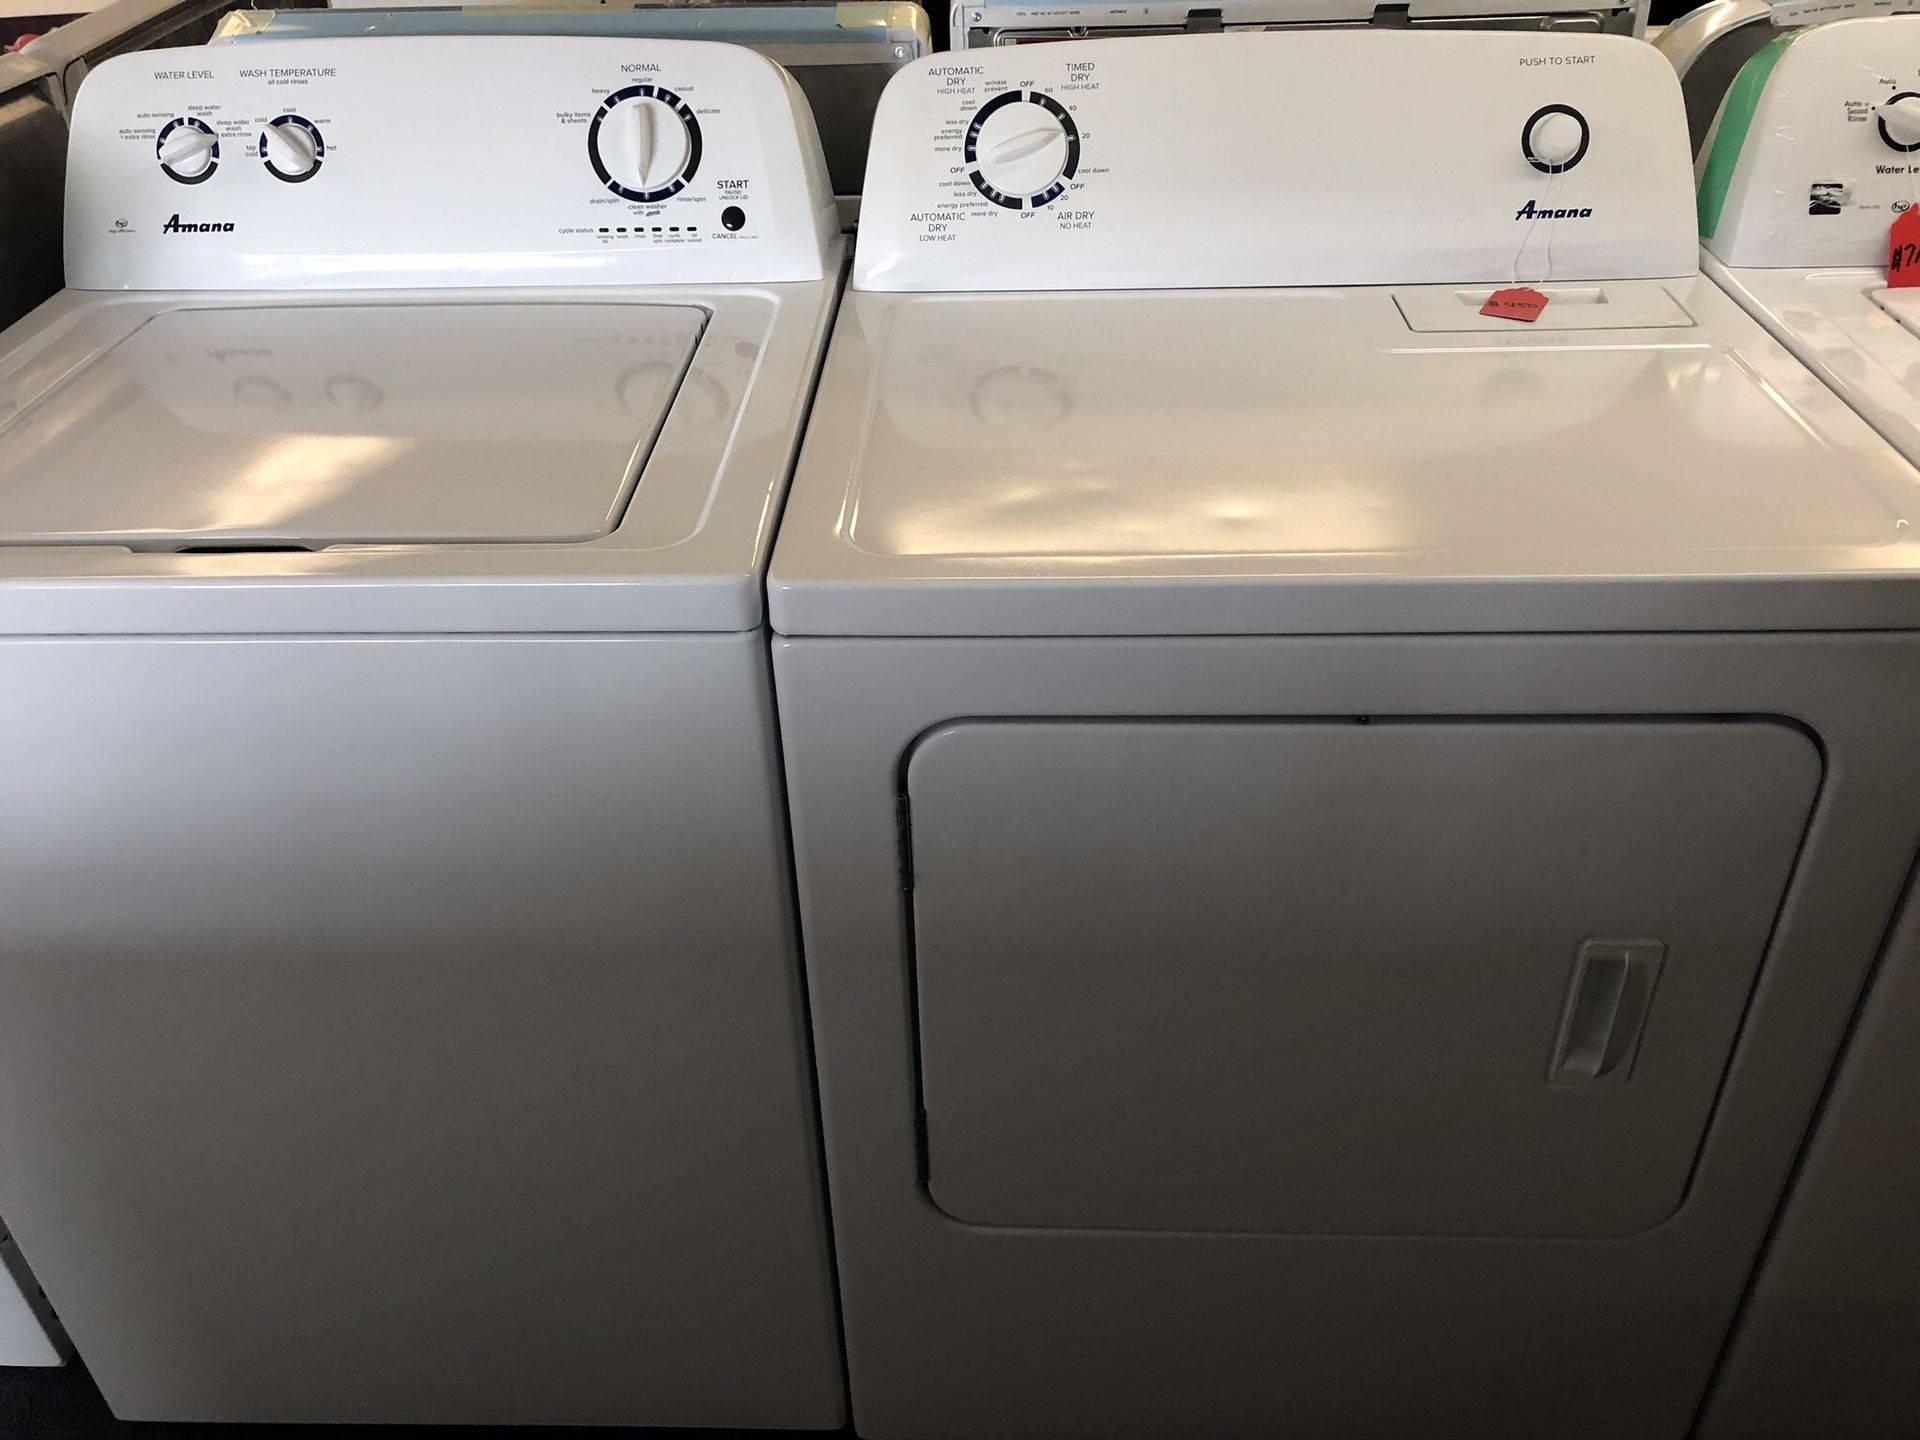 Used kenmore High Efficiency washer and dryer set. 1 year warranty